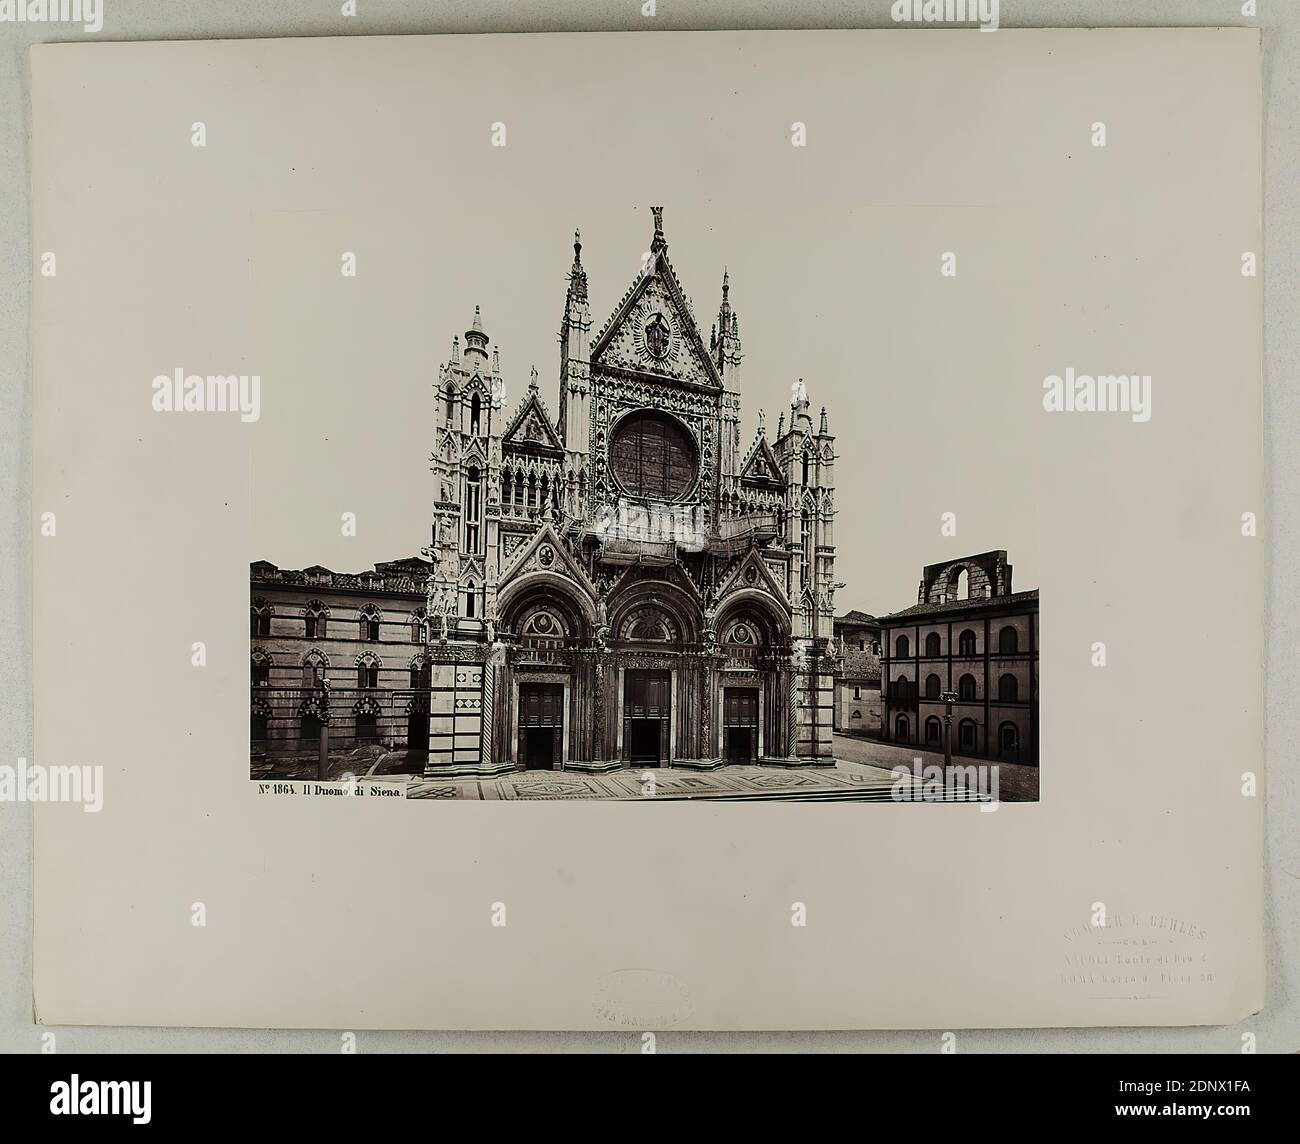 Giorgio Sommer, Il Duomo di Siena, albumin paper, black and white positive process, sheet size: height: 18.20 cm; width: 24.40 cm, inscribed: recto and: exposed: No. 1864 Il Duomo di Siena, dry stamp: recto and on the cardboard: GIORGIO SOMMER, STUDIO MONTE DI DIO 4, MAGAZZINO S. CATERINA 5, NAPOLI, and J. BRECKER, DEPOT A FLORENCE, VIA MAGGIO 15, stamp: on the verso of the cardboard: inventory, travel photography, architectural photography, exterior construction of a church Stock Photo